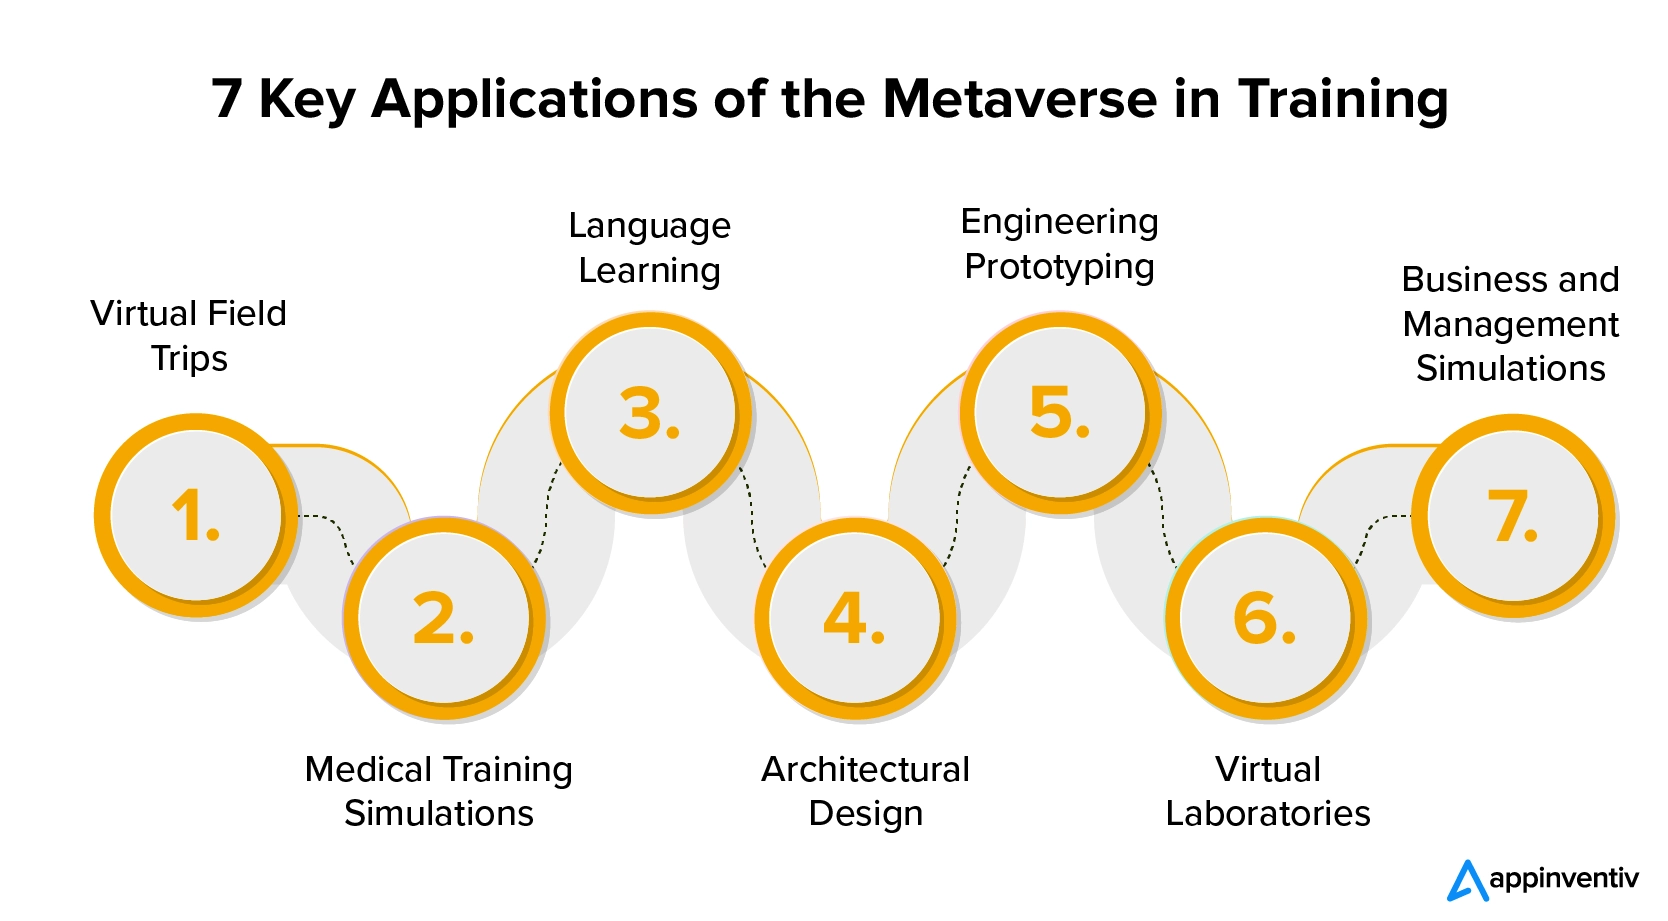 7 Key Applications of the Metaverse in Training